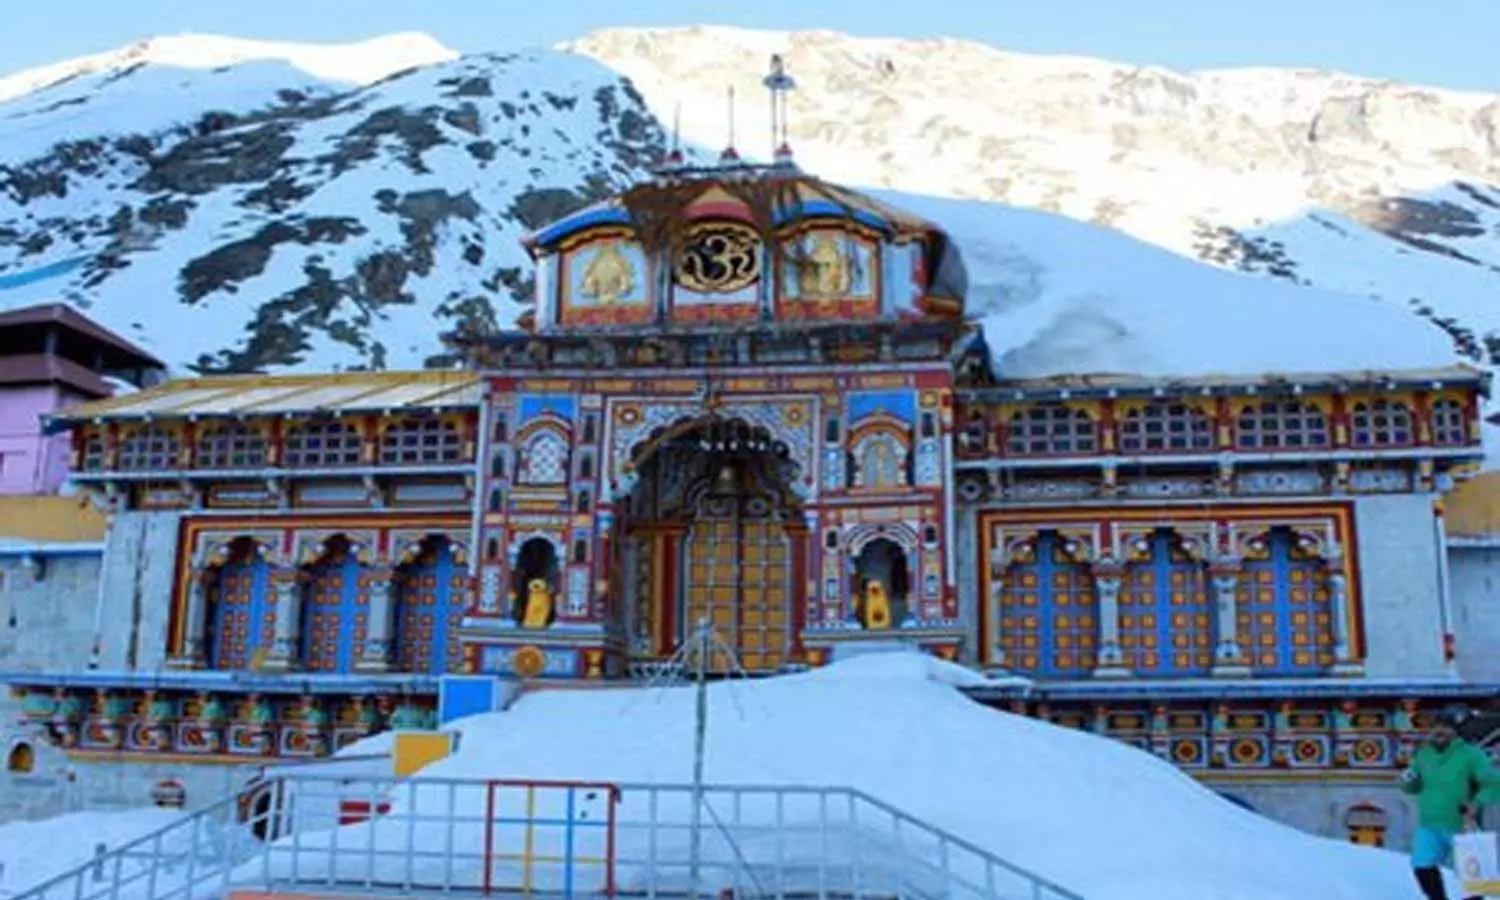 Badrinath is mentioned in Puranas and Mahabharata, Lord Vishnu is seated here